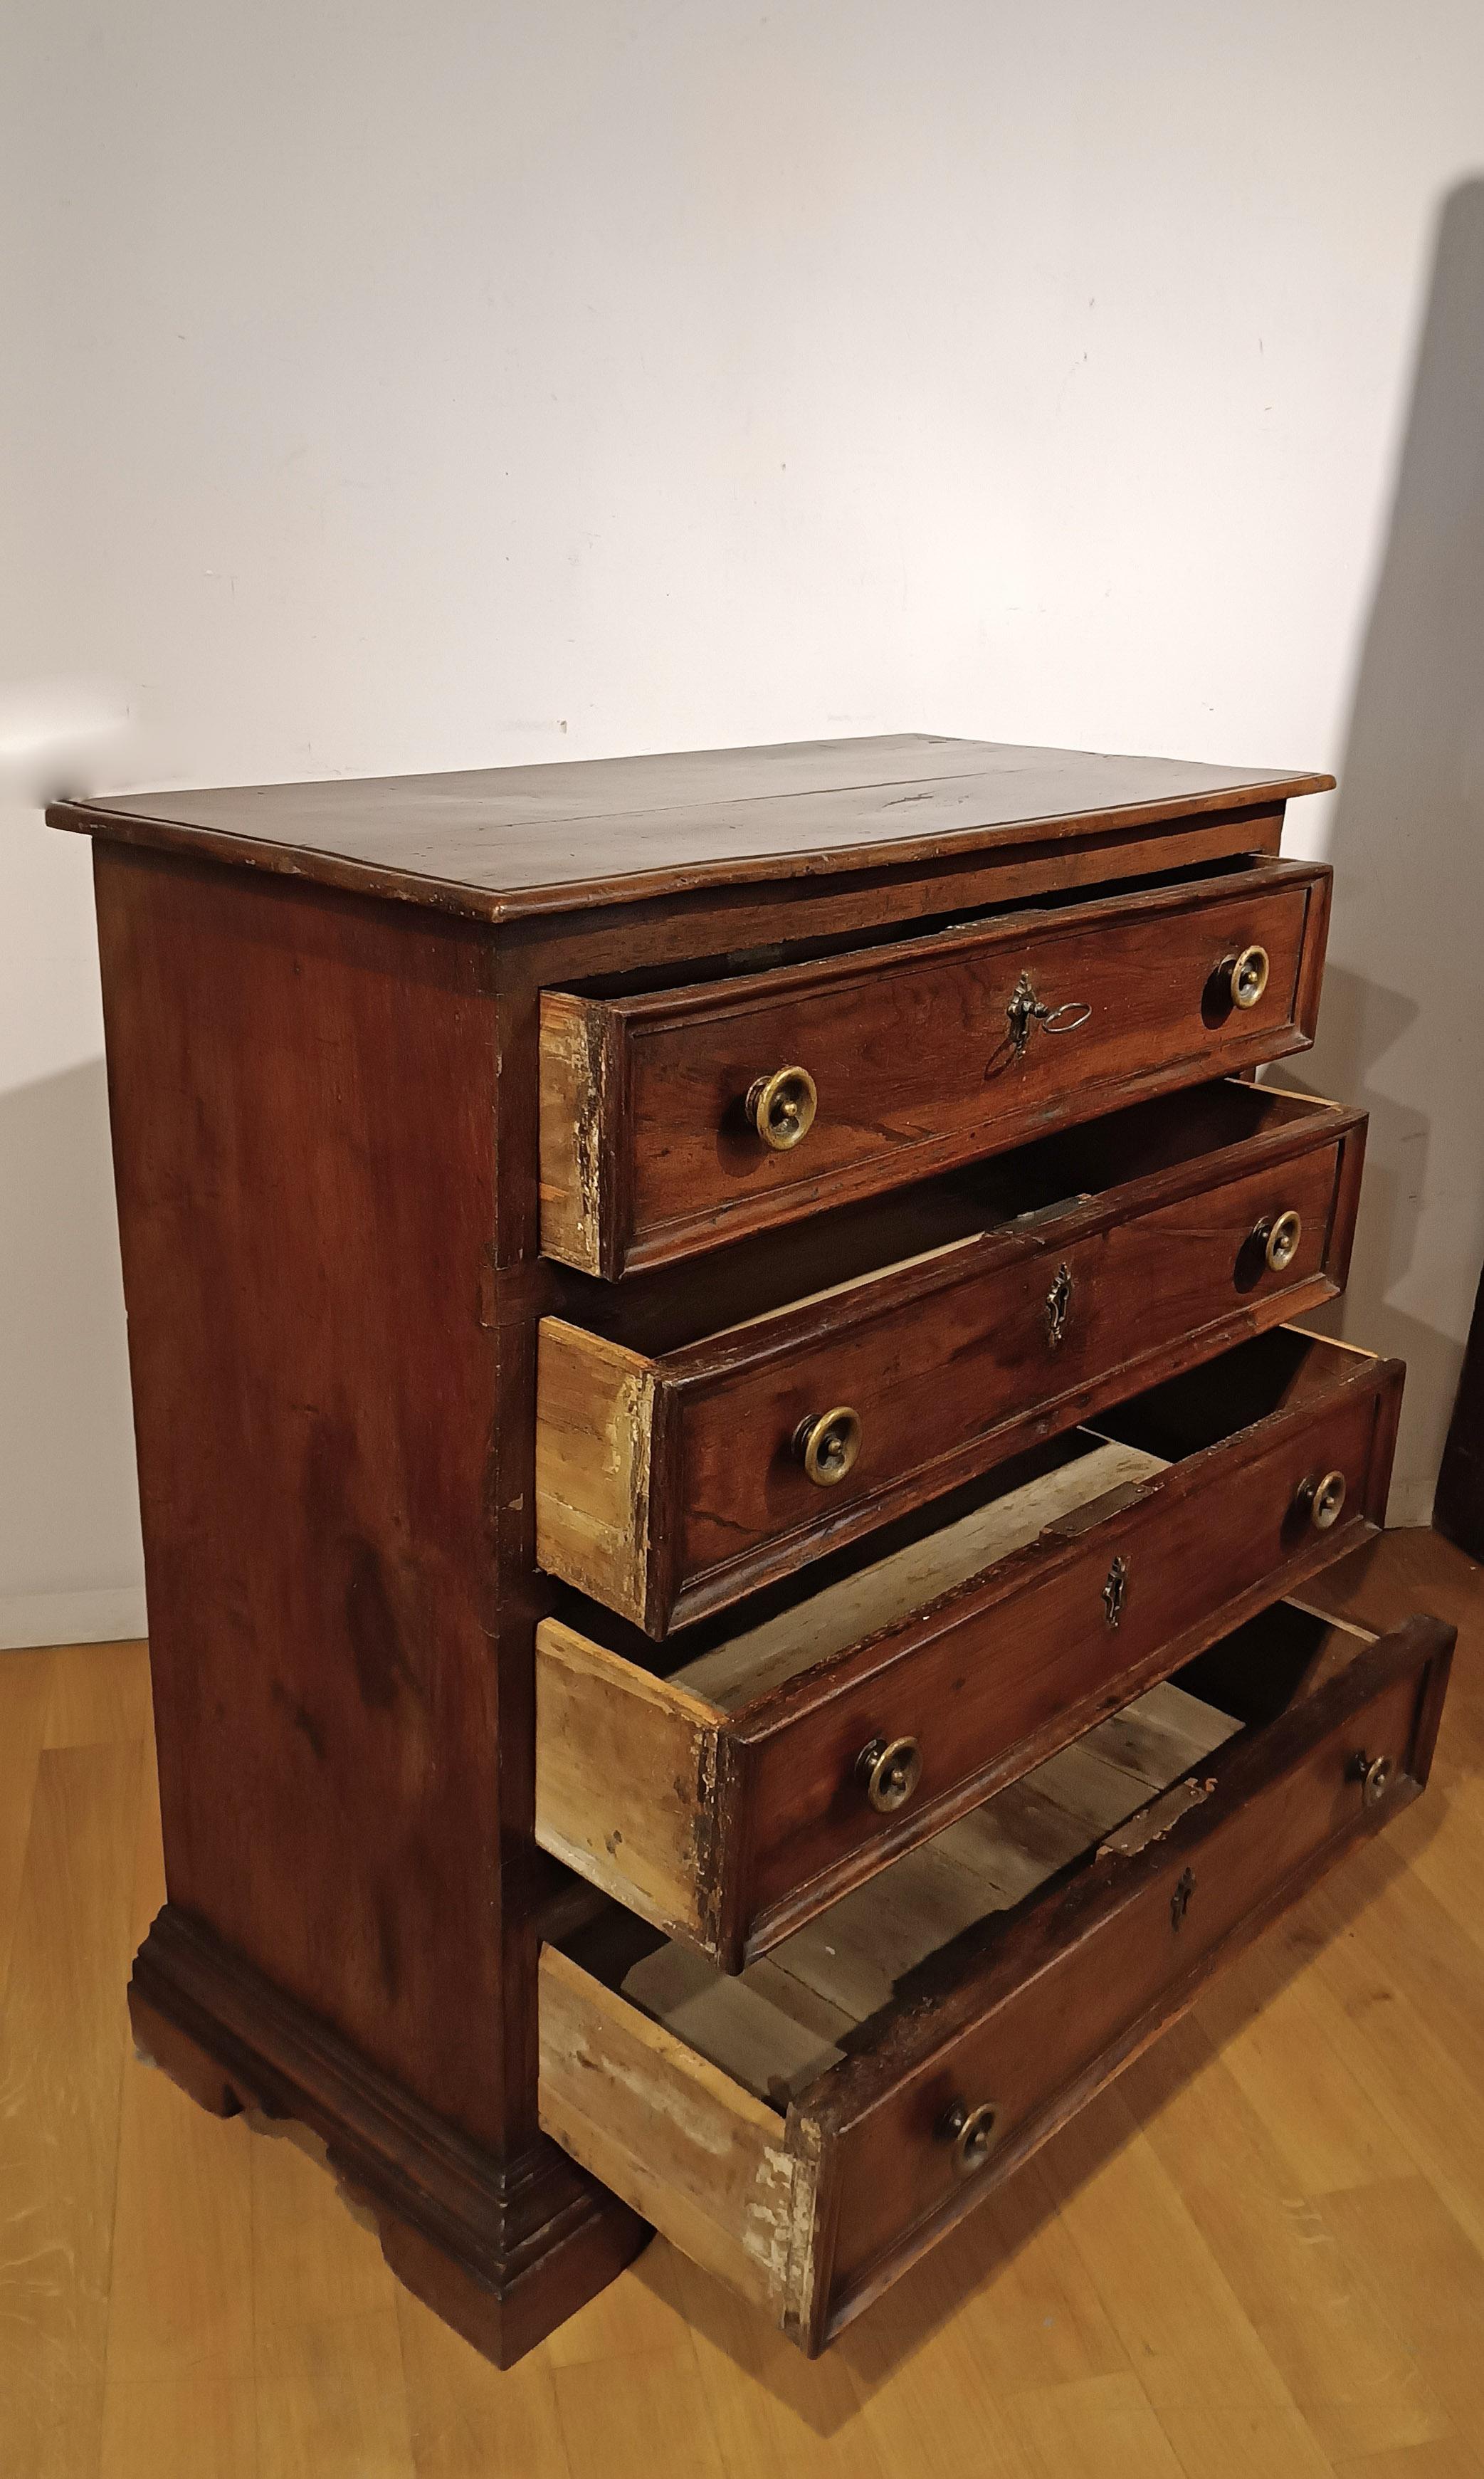 17th CENTURY CHEST OF DRAWERS IN SOLID AND VENEREED WALNUT For Sale 4